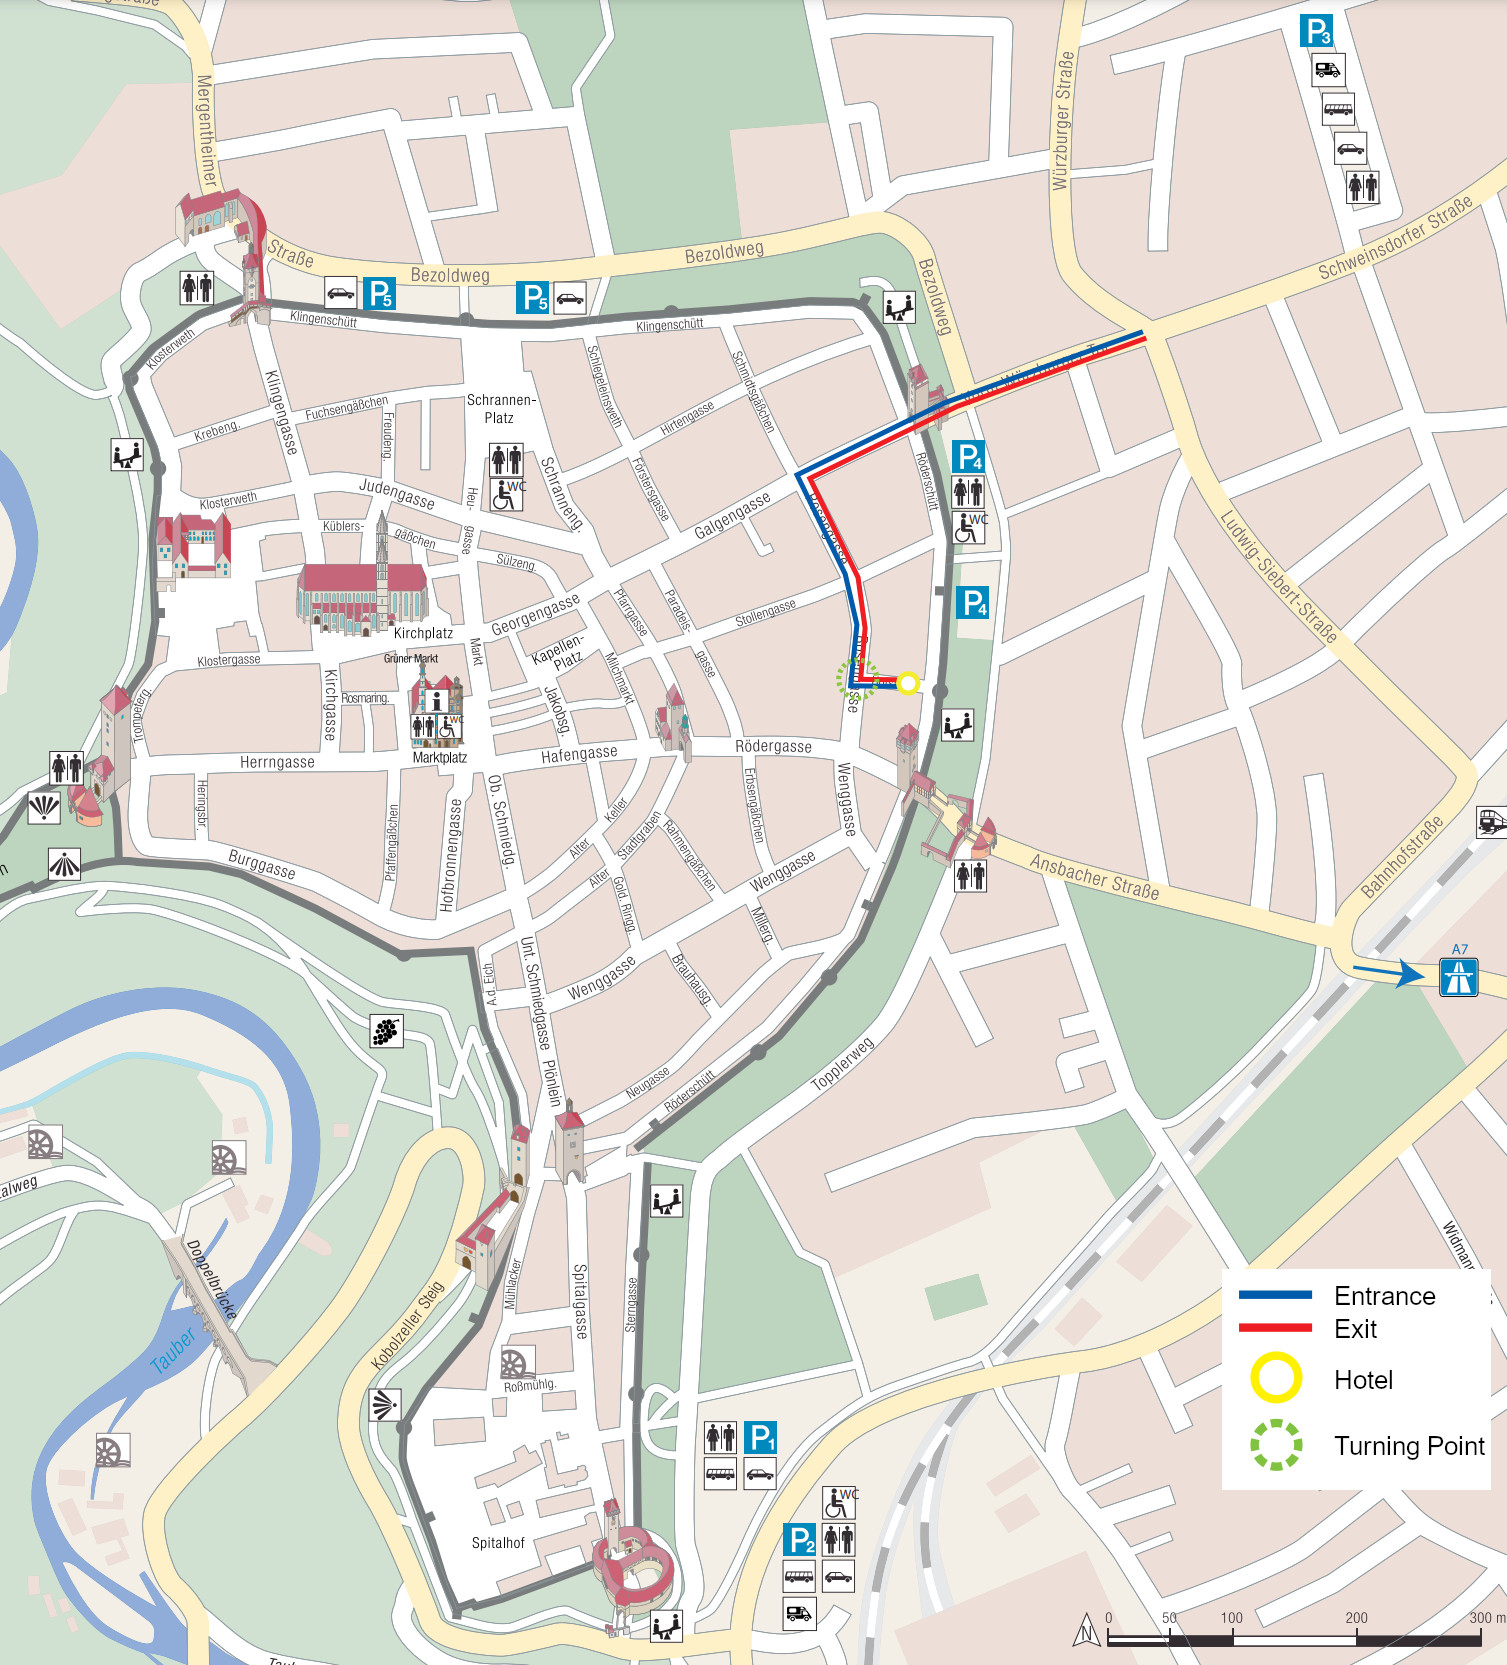 The recommended bus route to the Prinzhotel Rothenburg